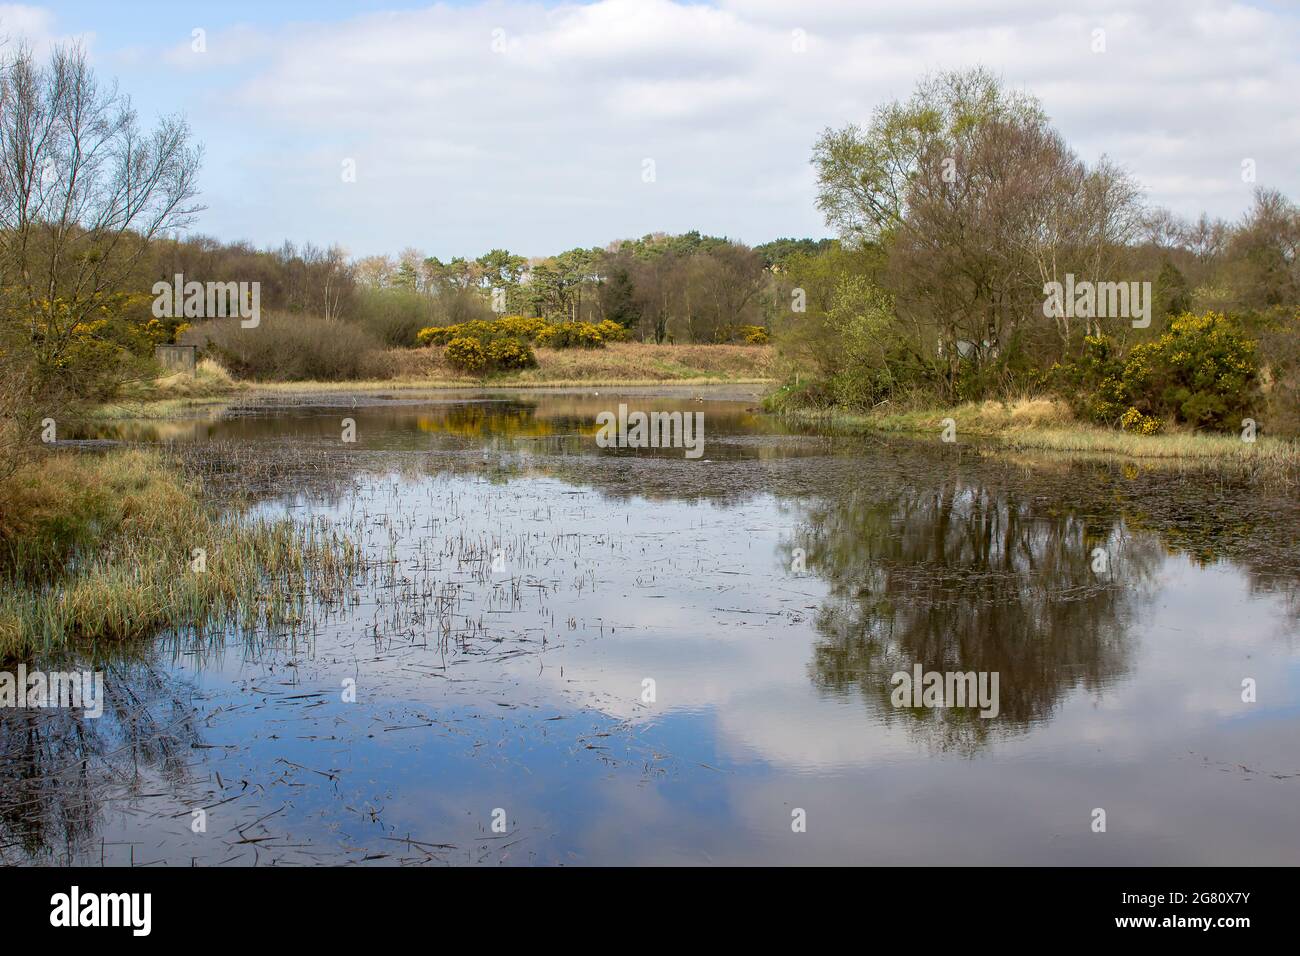 The lake beside Clandeboye Golf Course and part of  the old lead mines workings in Conlig, County Down in N Ireland. This environmentally friendly wat Stock Photo